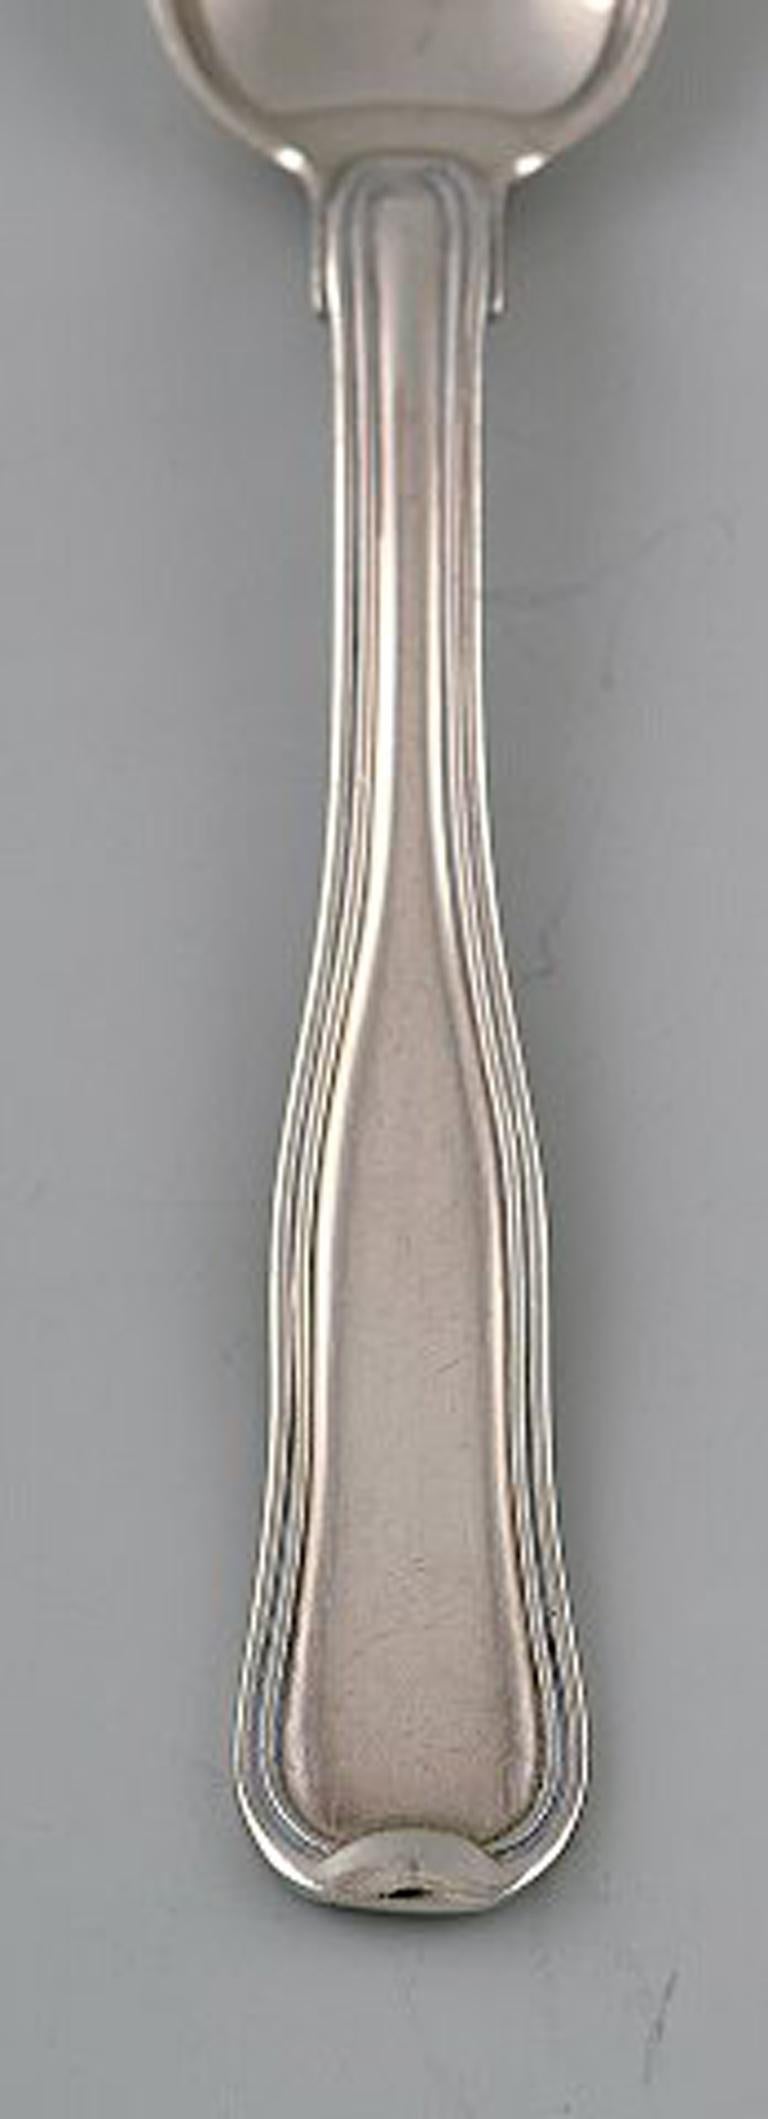 Georg Jensen Old Danish service. Tea spoon. 7 pcs in stock.
Stamped.
In very good condition.
Measures: 12.7 cm.